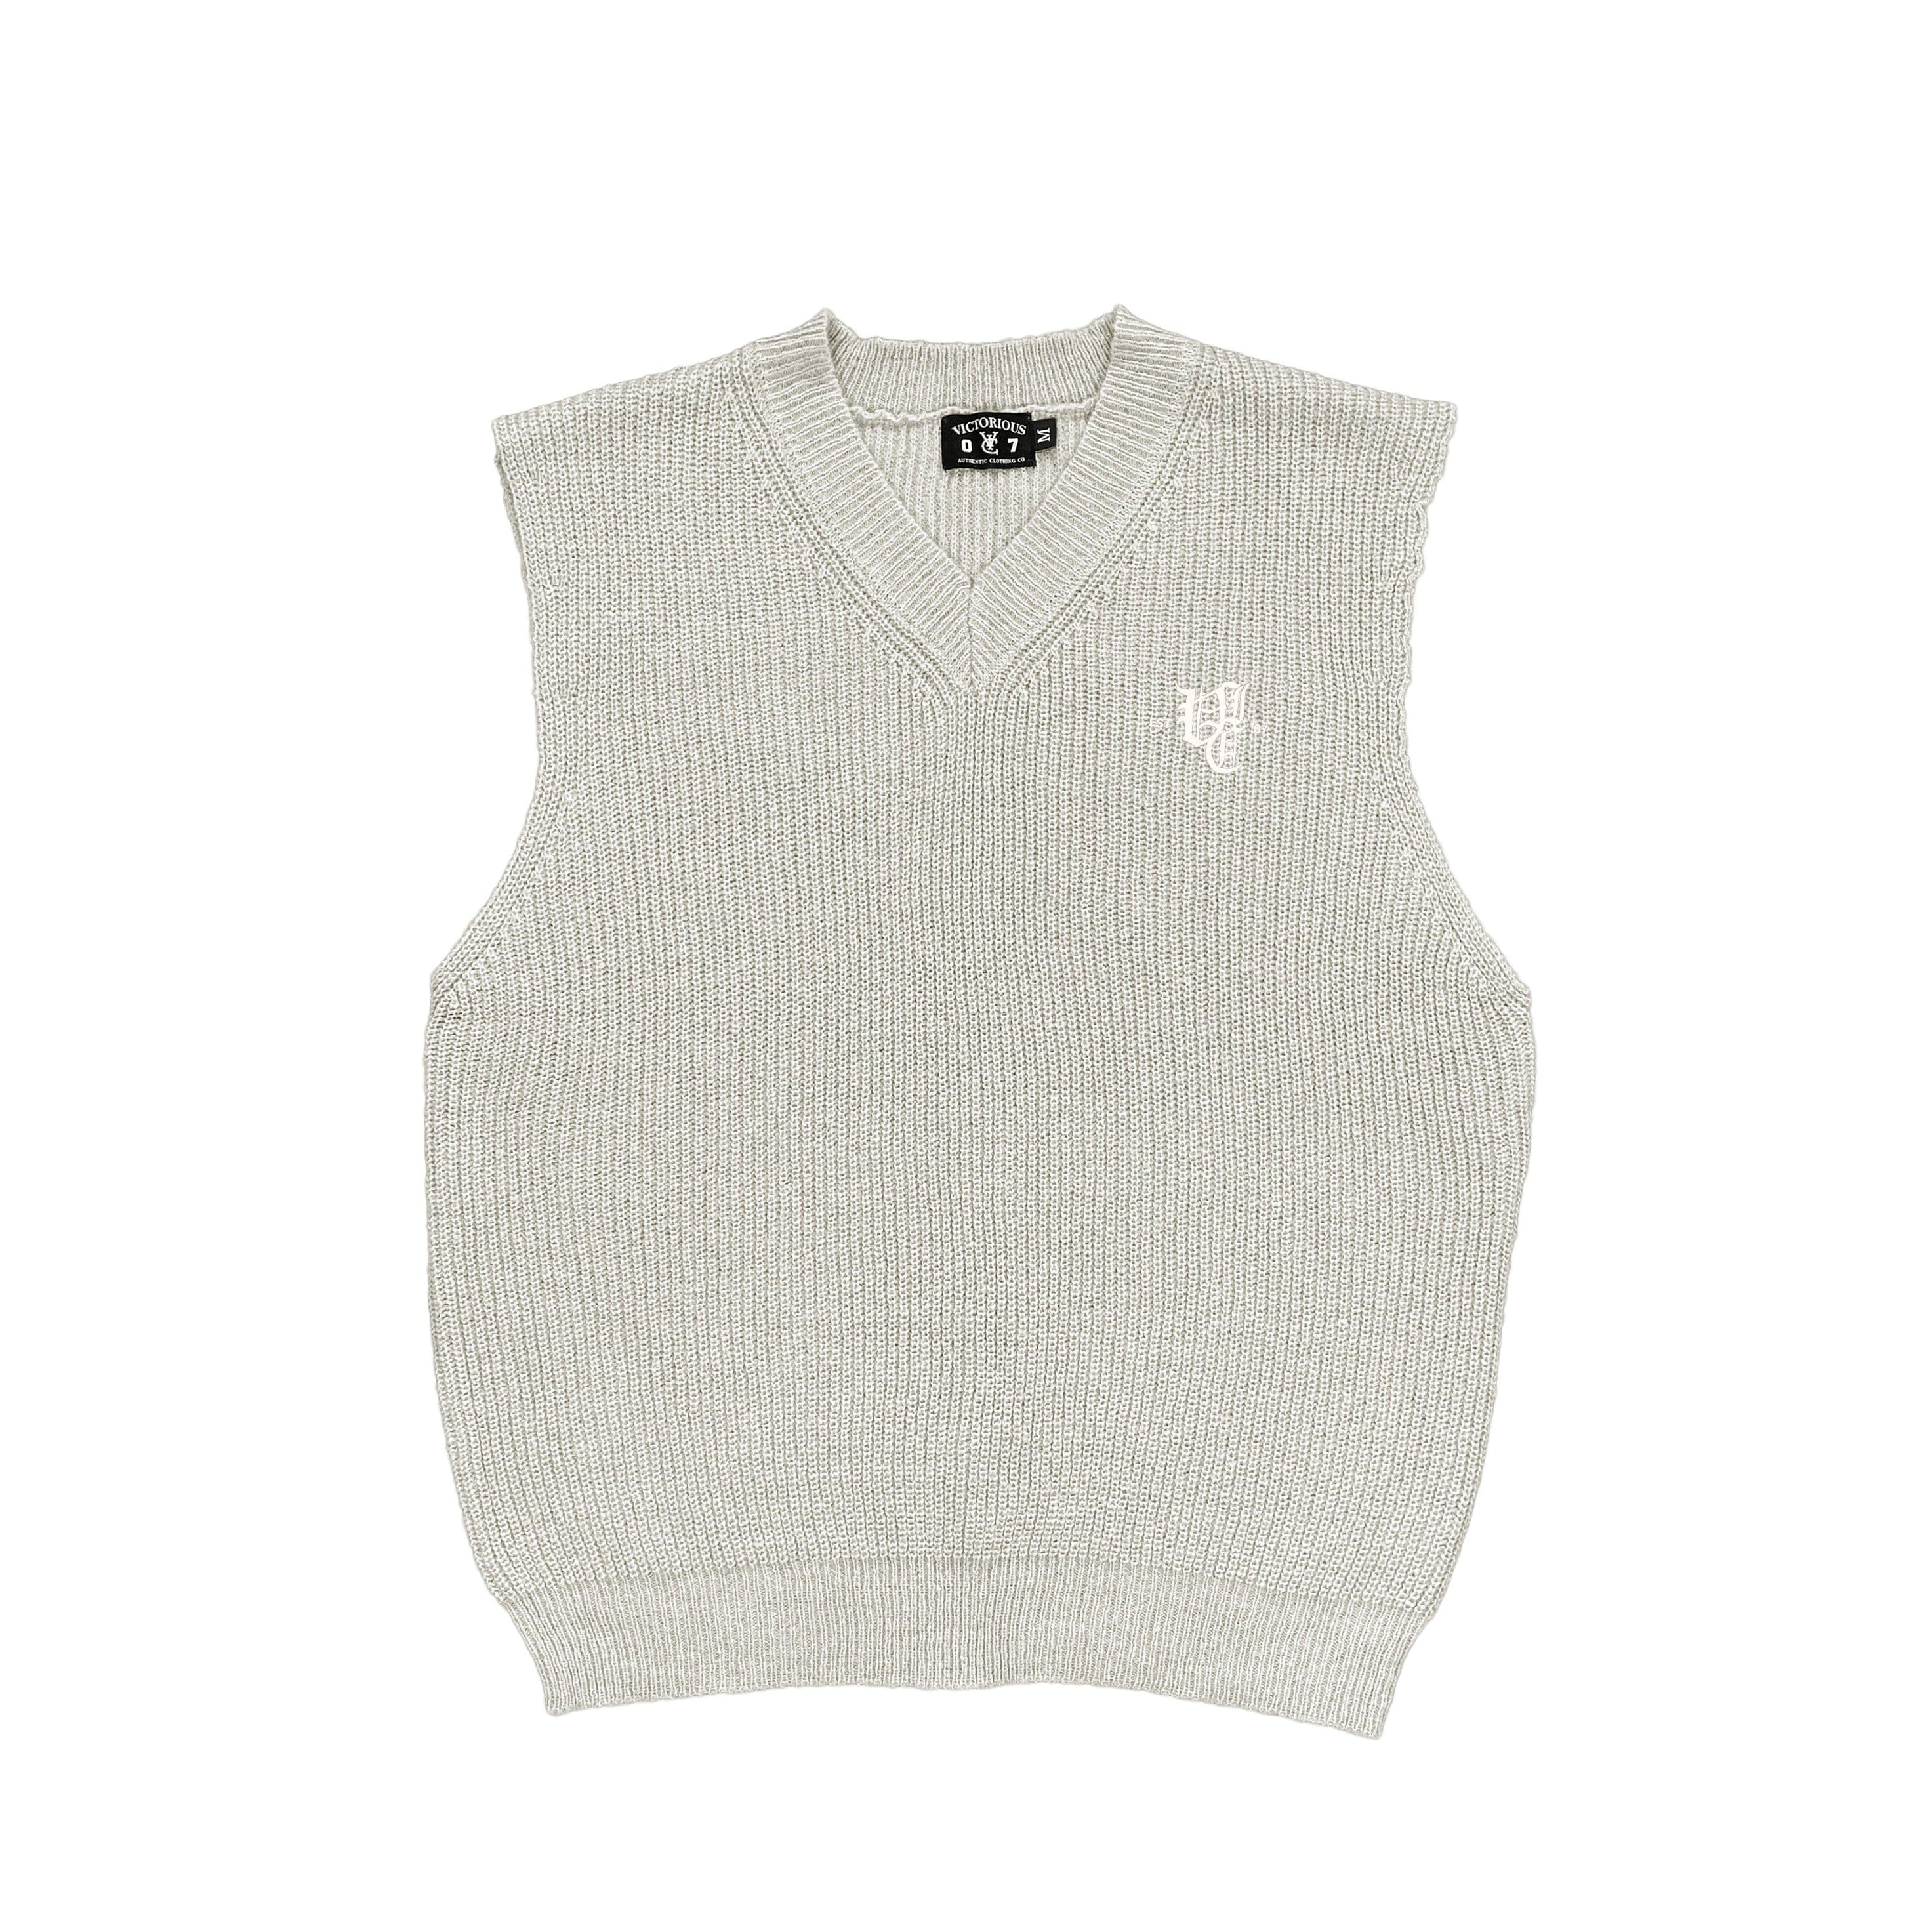 Premium quality mohair-blend knit vest sweater by New Zealand skate and streetwear clothing label VIC Apparel. Classic minimal design. Relaxed fit.